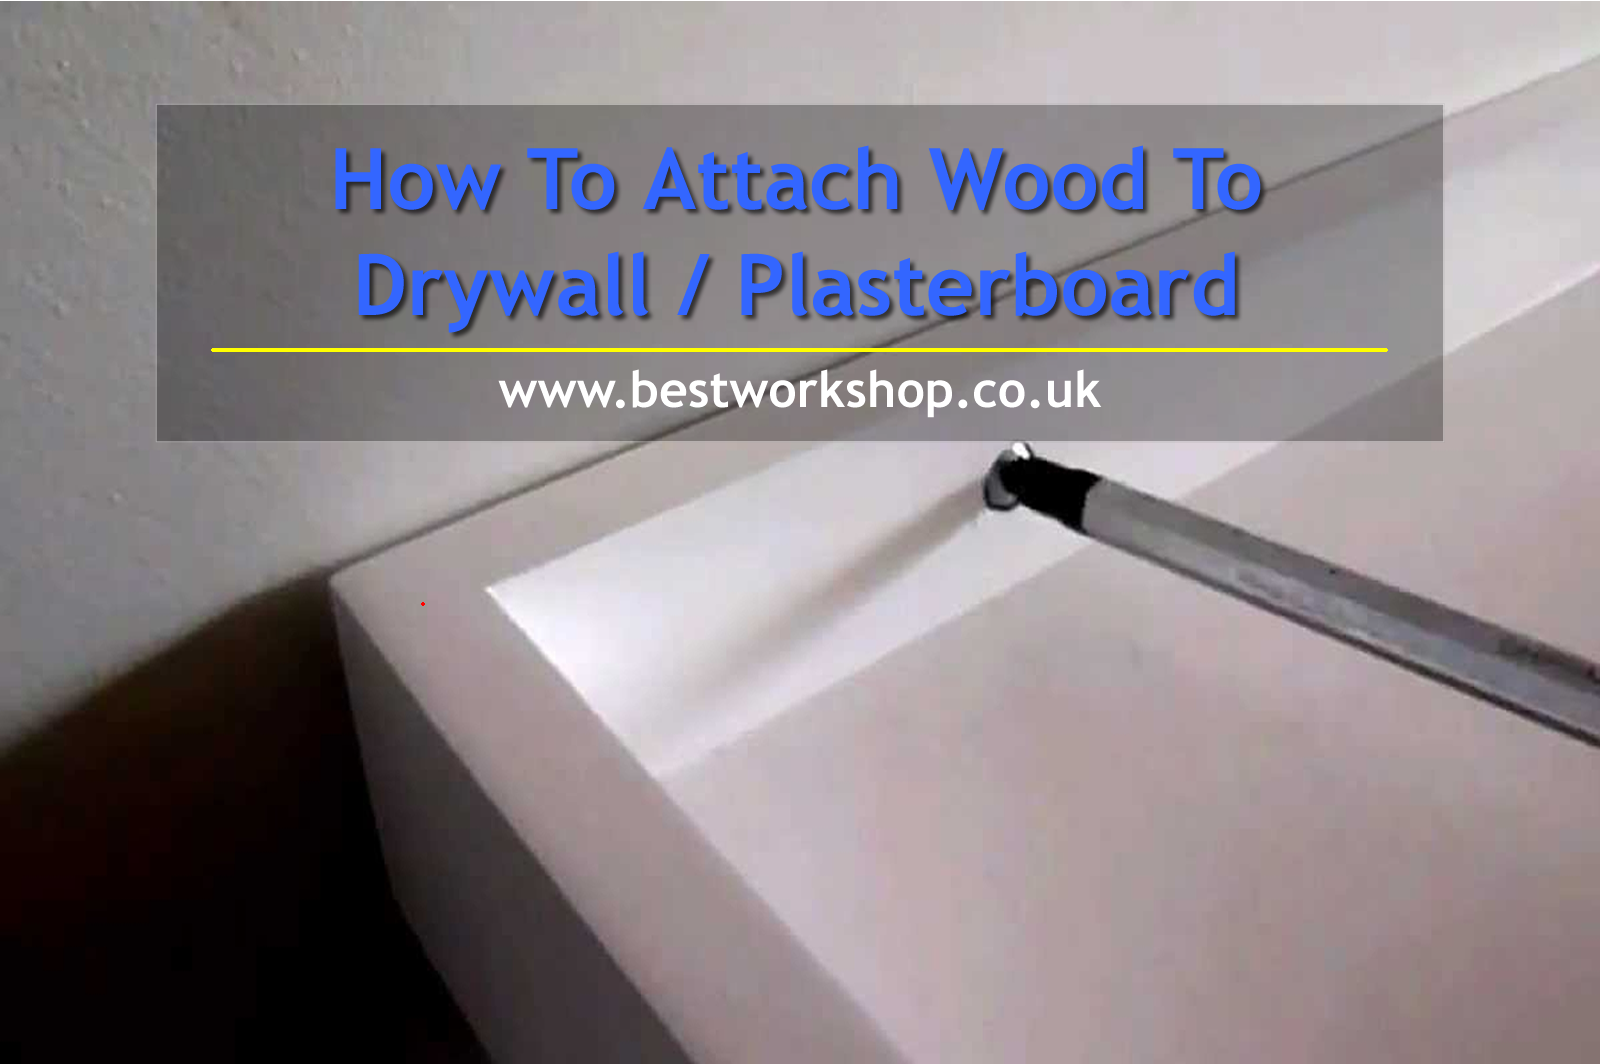 How To Attach Wood To Drywall or Plasterboard